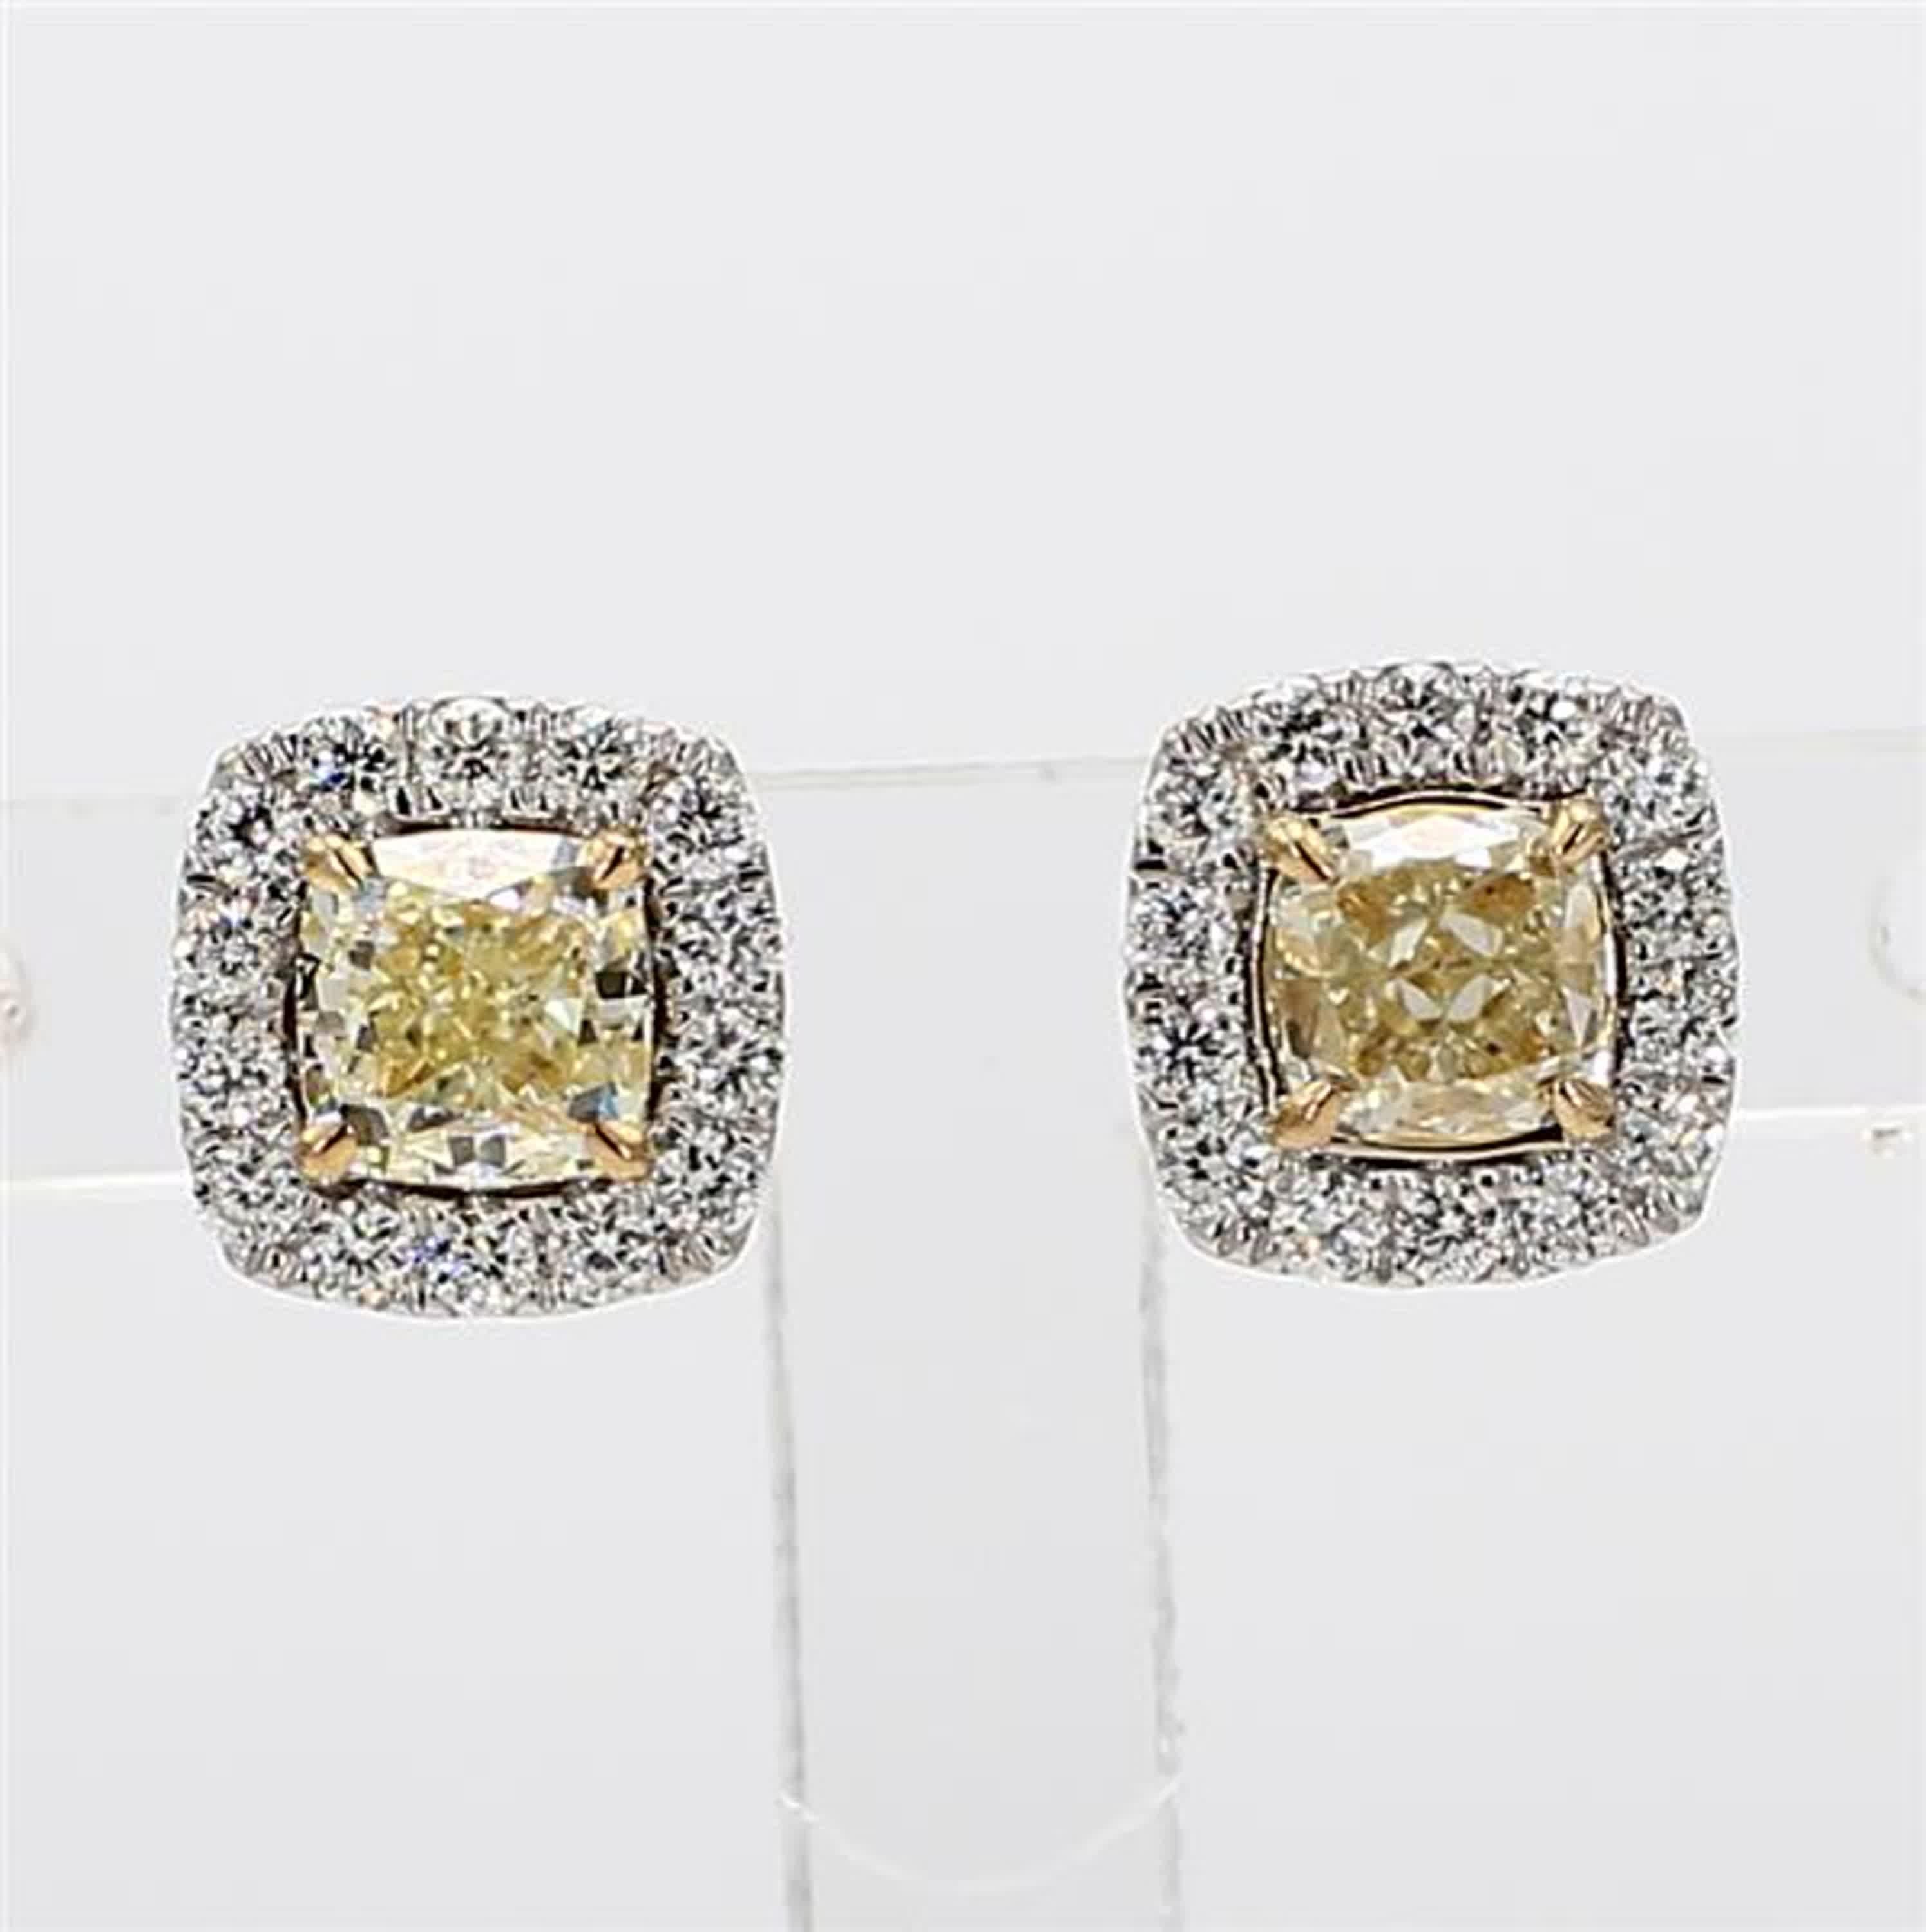 RareGemWorld's classic diamond earrings. Mounted in a beautiful 18K Yellow and White Gold setting with natural cushion cut yellow diamonds. The yellow diamonds are surrounded by round natural white diamond melee. These earrings are guaranteed to